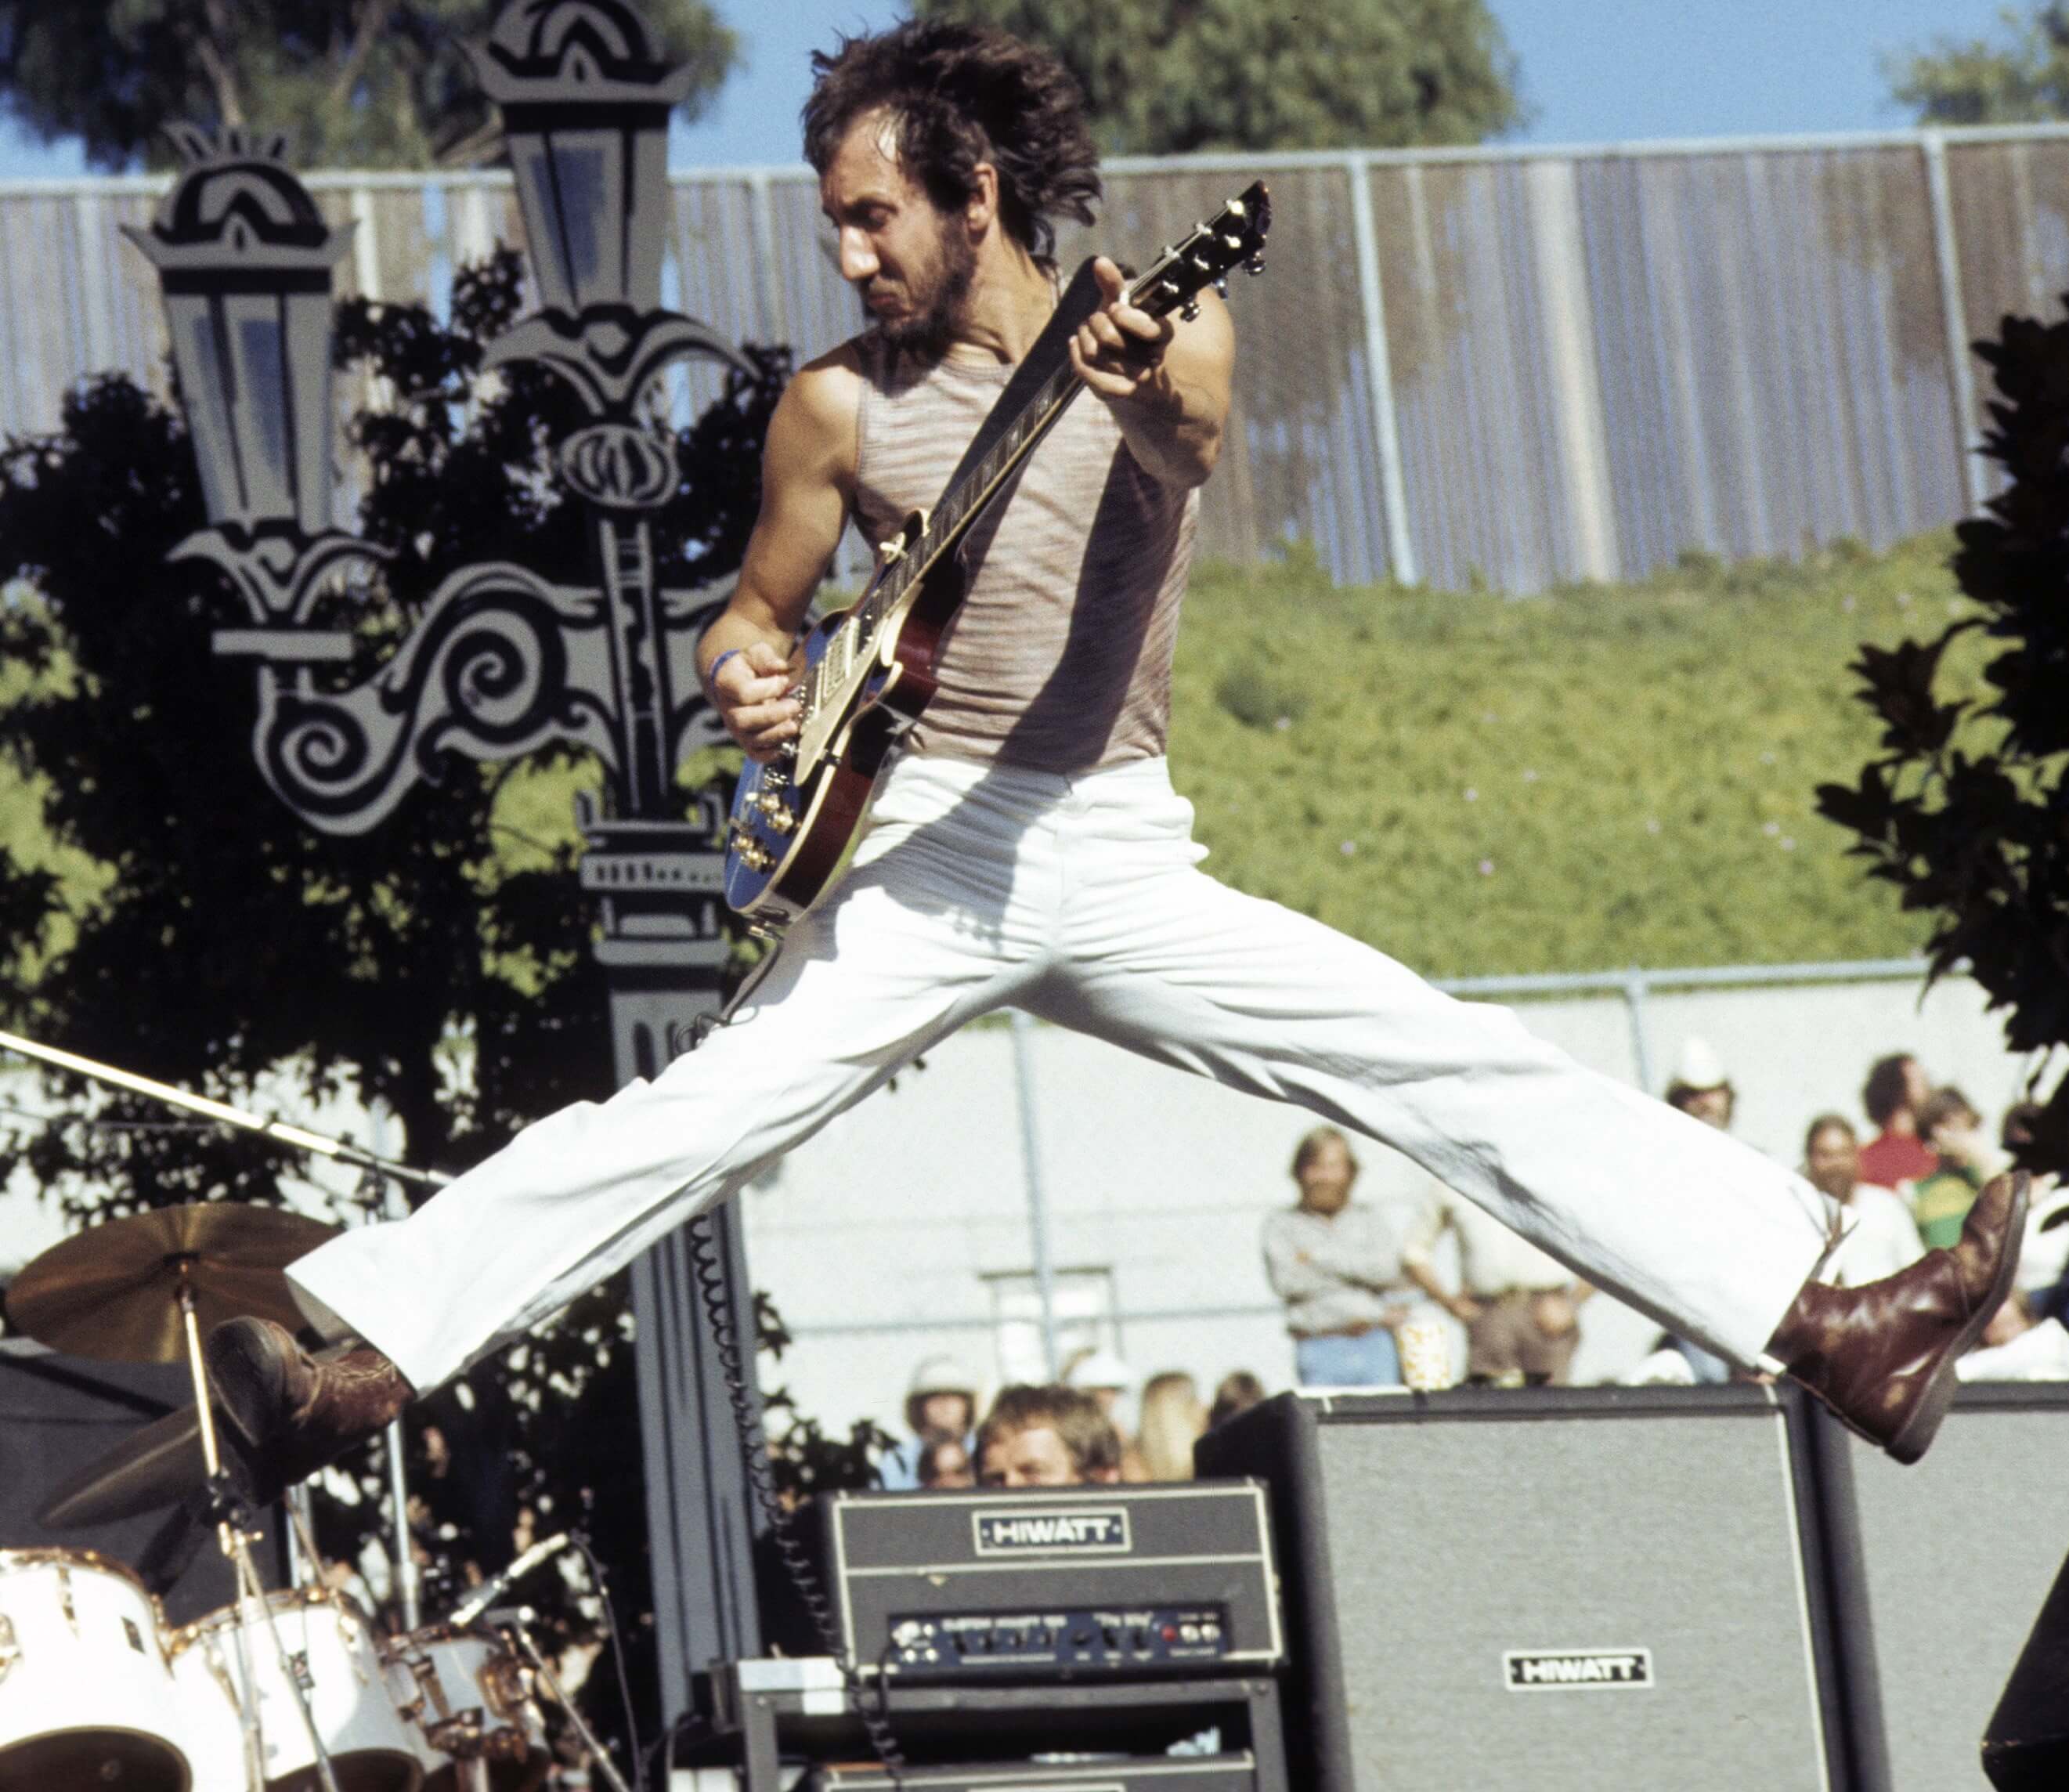 The Who's Pete Townshend jumping